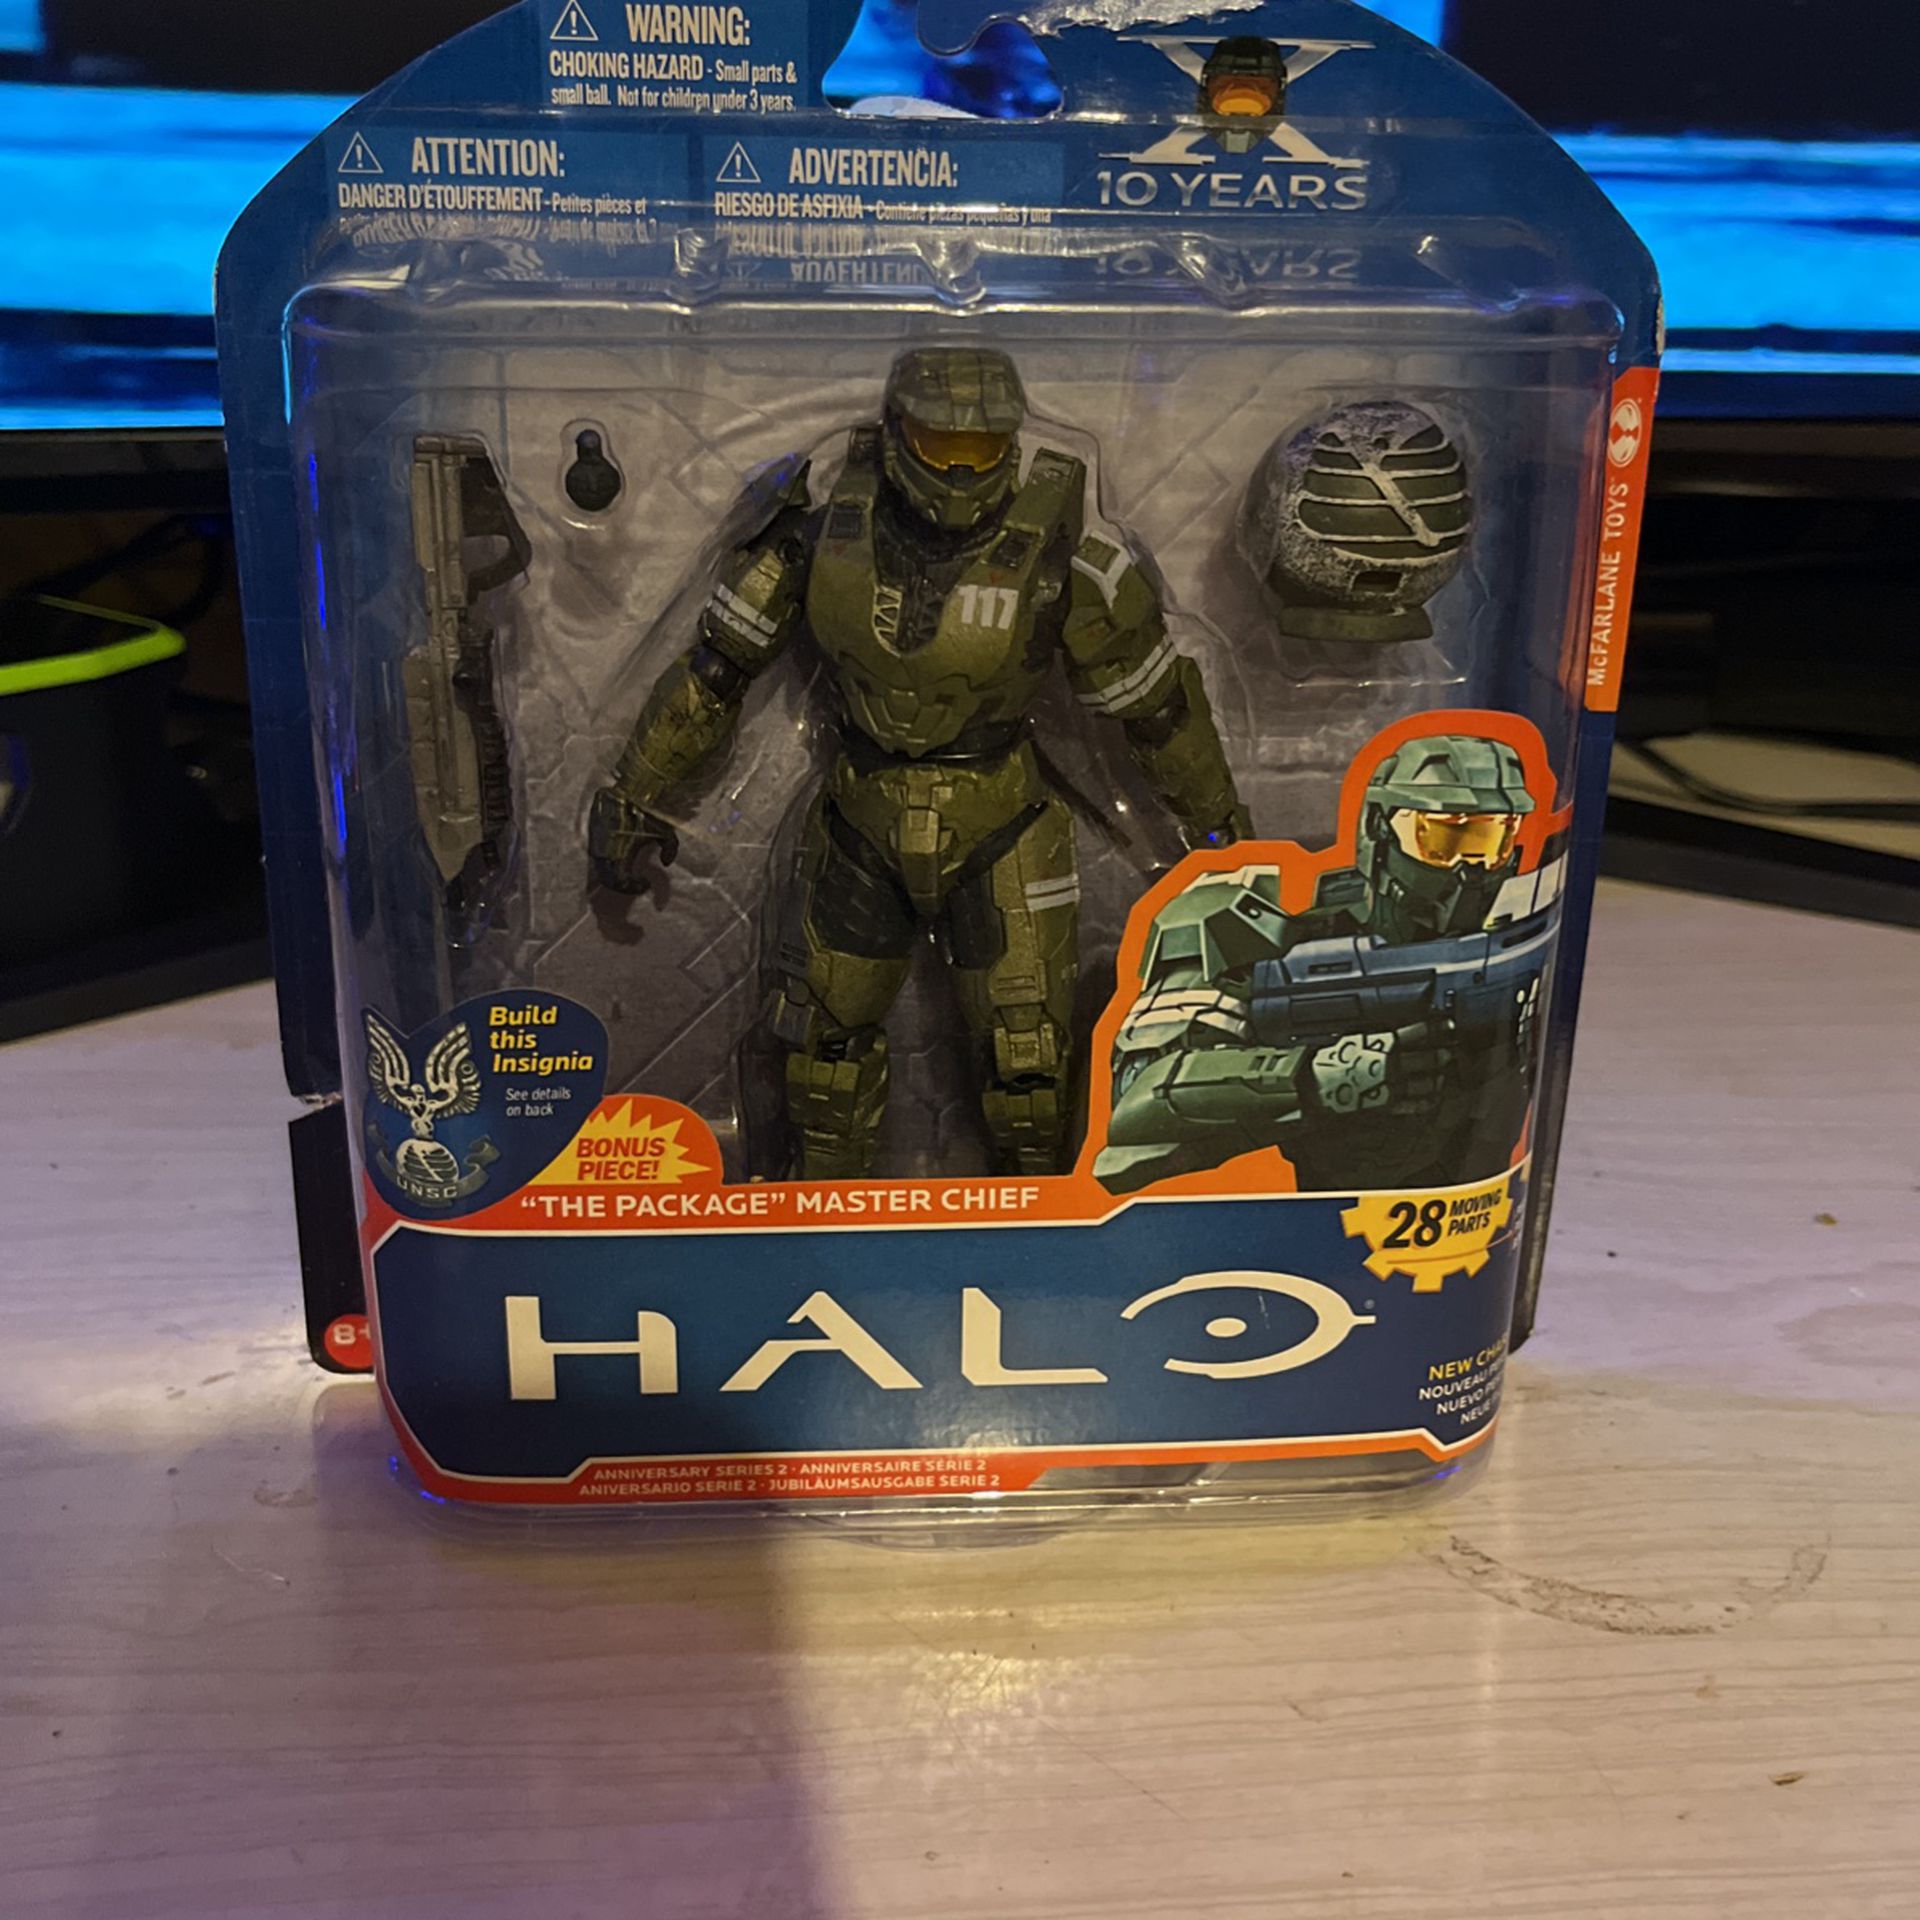 Halo 10 Year Anniversary action figure of  “The Package” Master Chief new & sealed